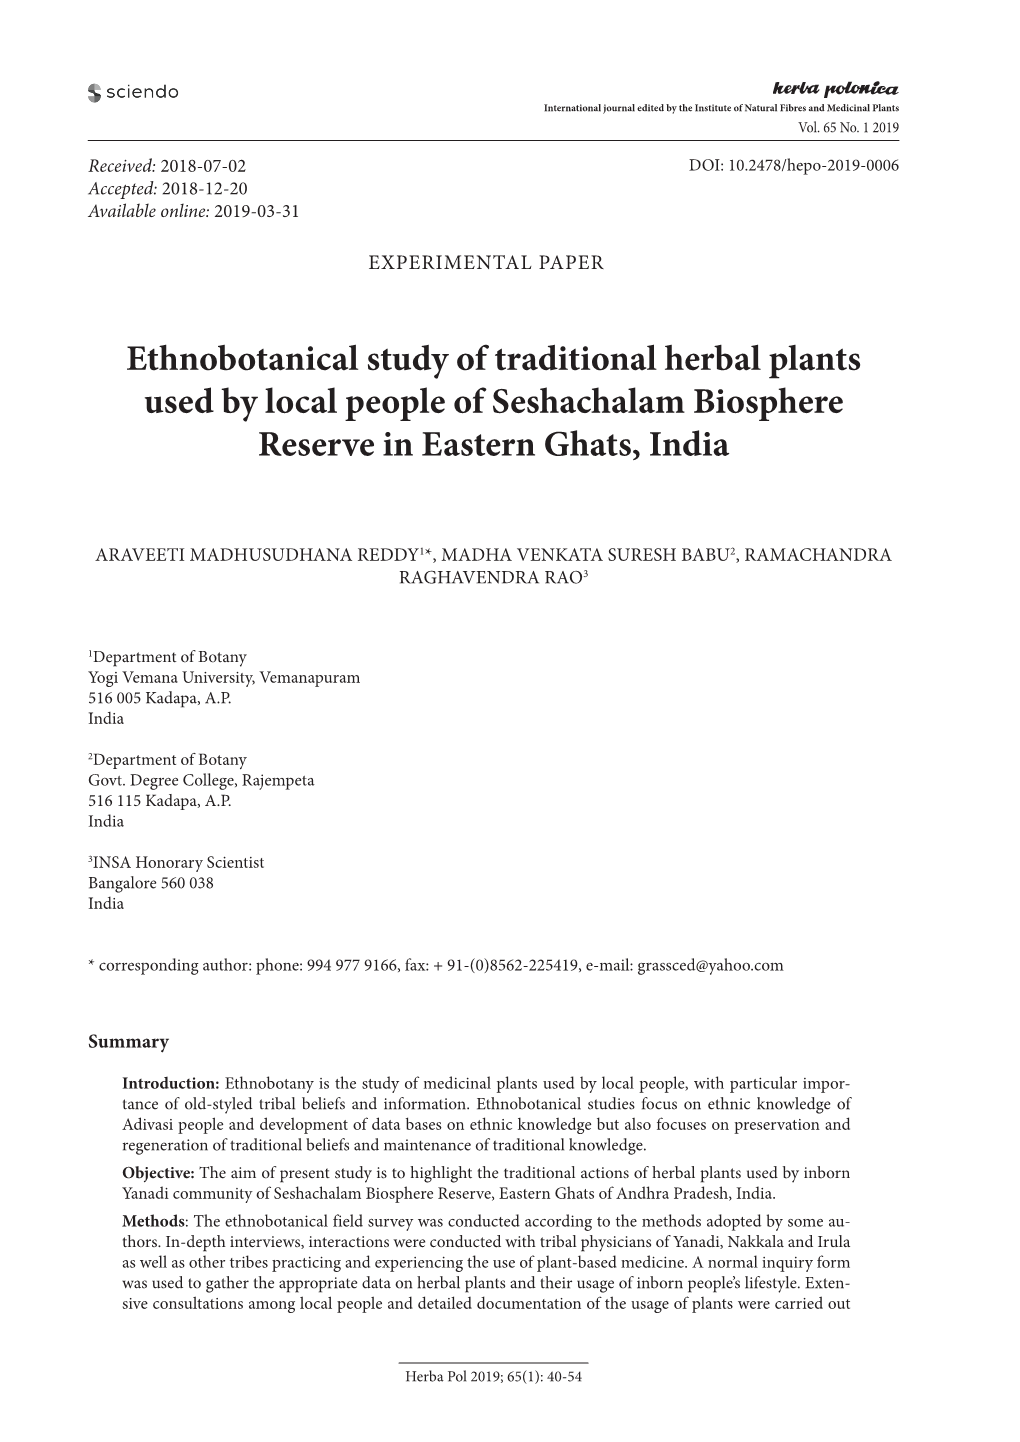 Ethnobotanical Study of Traditional Herbal Plants Used by Local People of Seshachalam Biosphere Reserve in Eastern Ghats, India